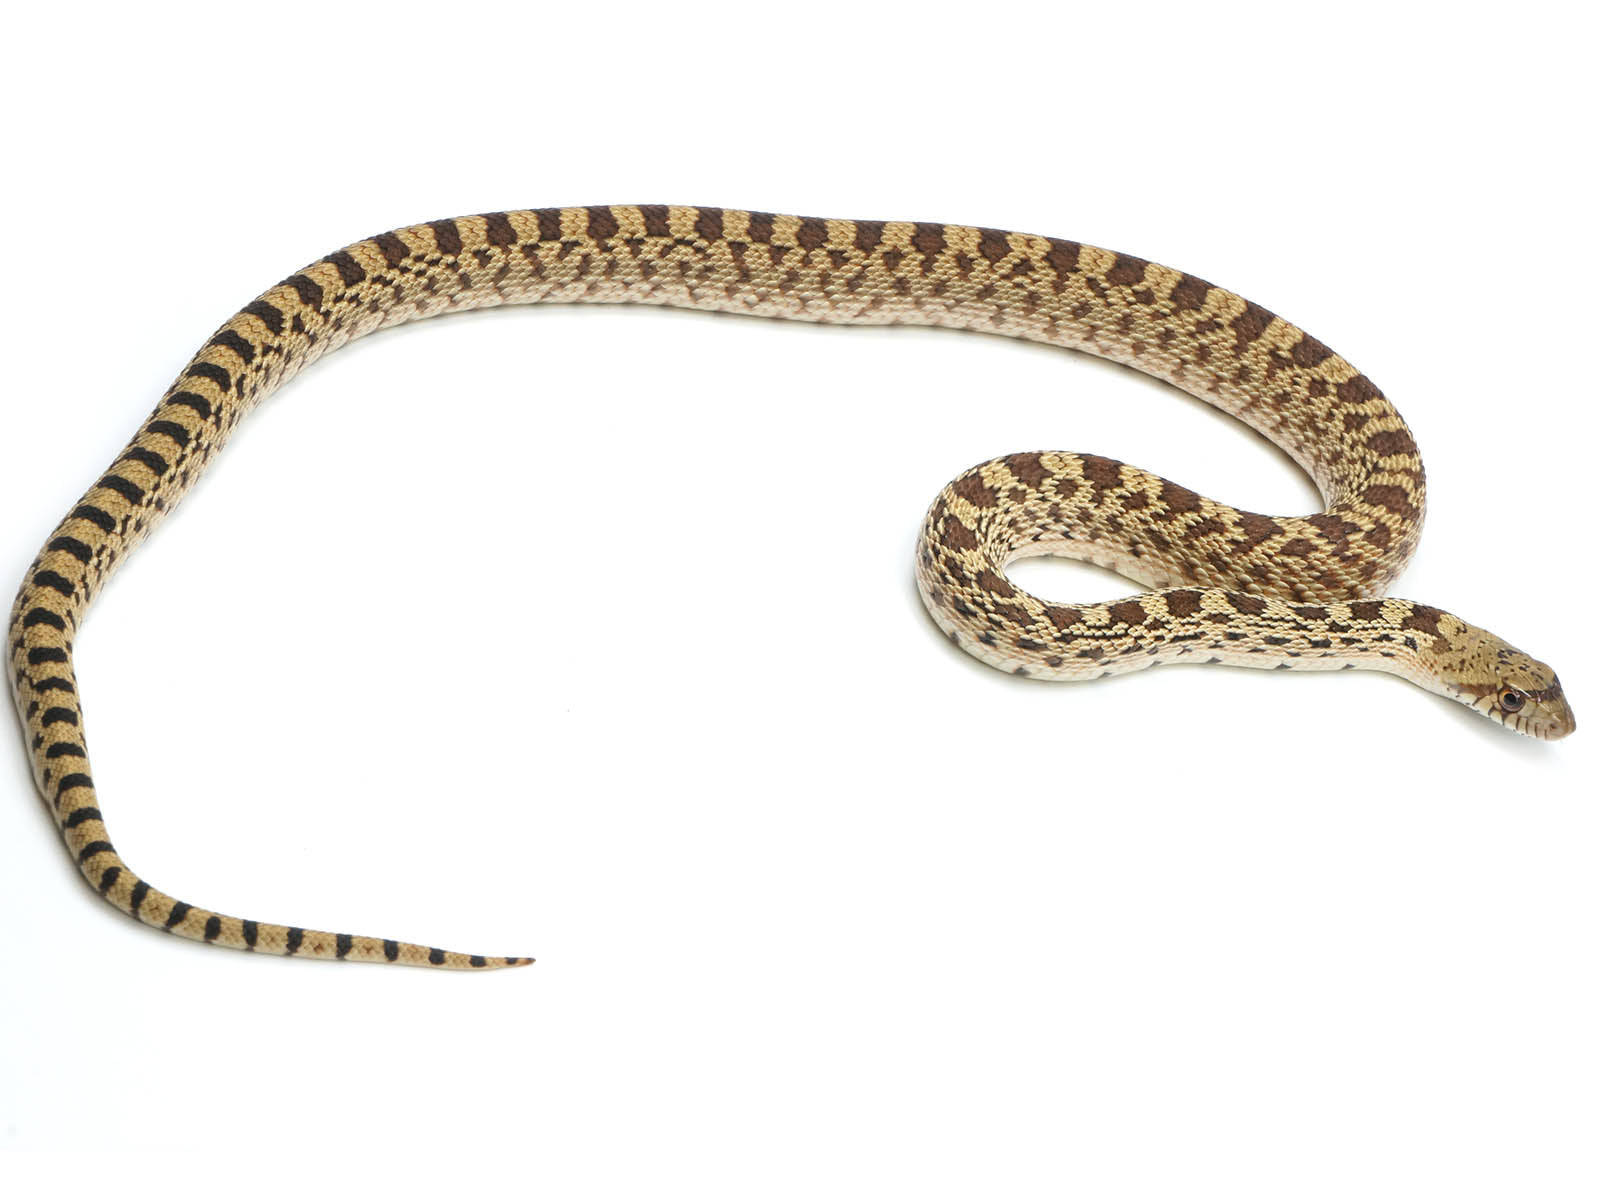 Gopher Snake With A Long Body Wallpaper